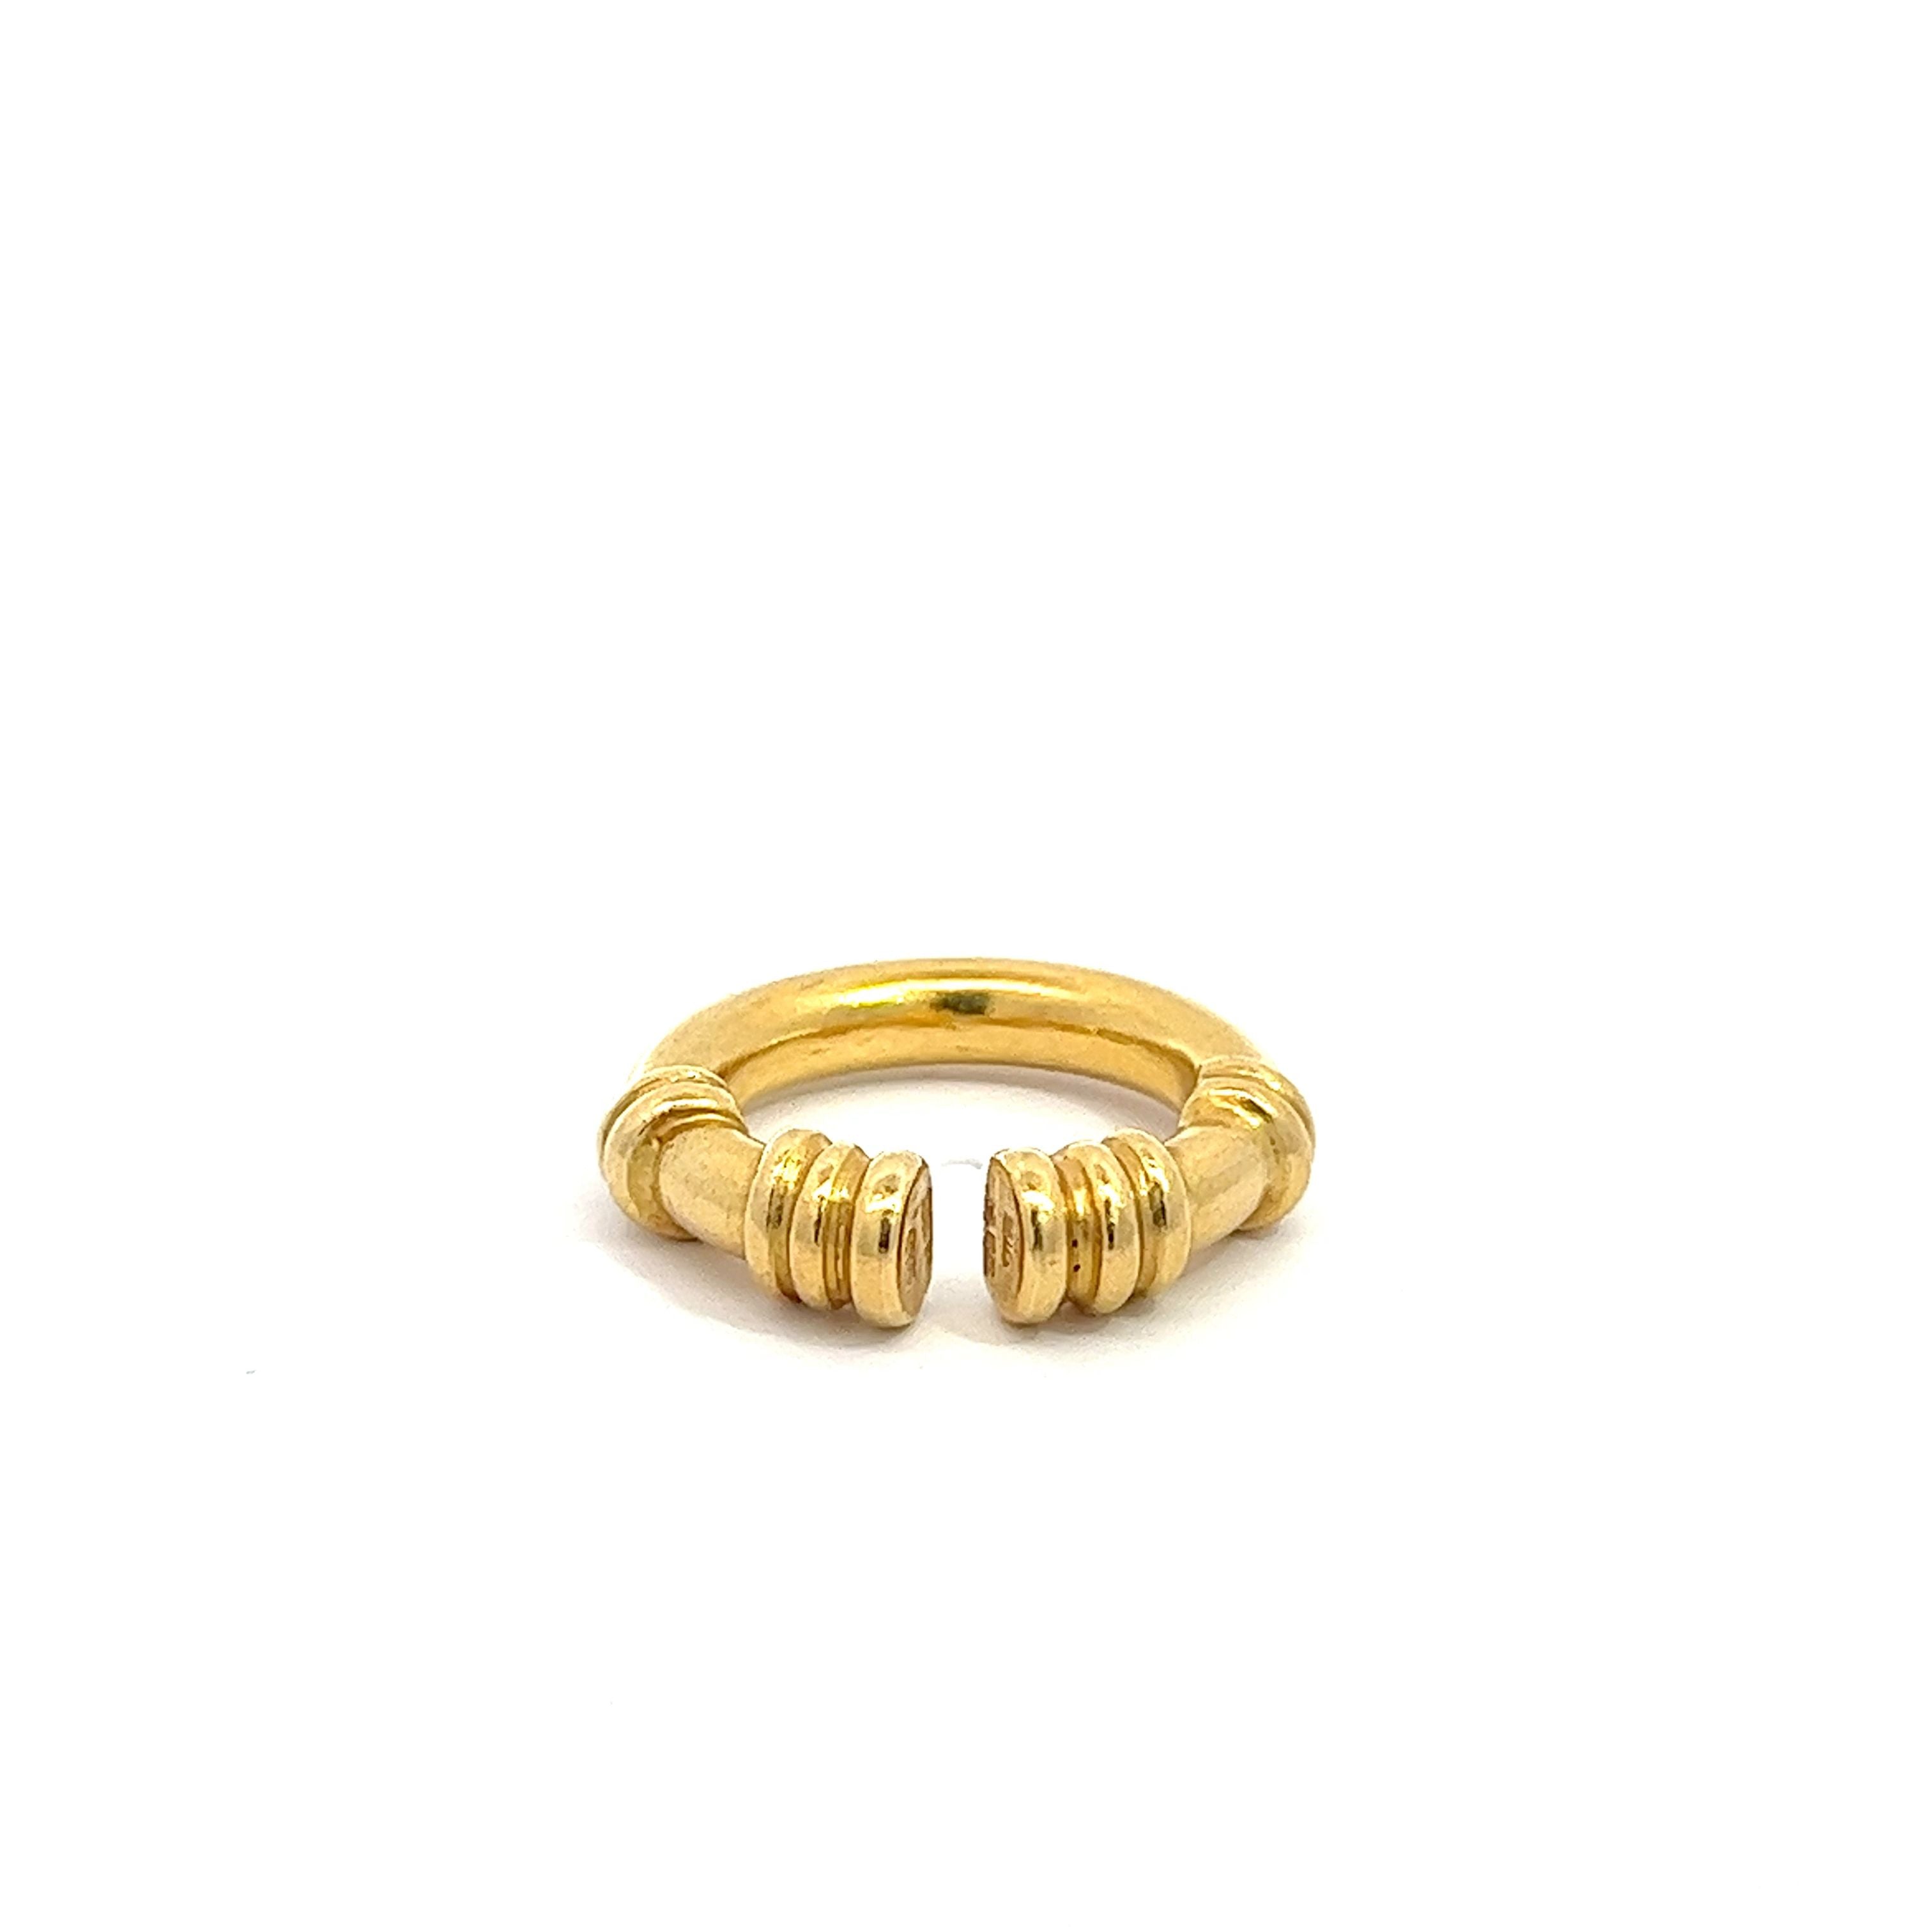 22k Solid Yellow Gold Textured Open Gap Unclosed Ring-Rings-ASSAY